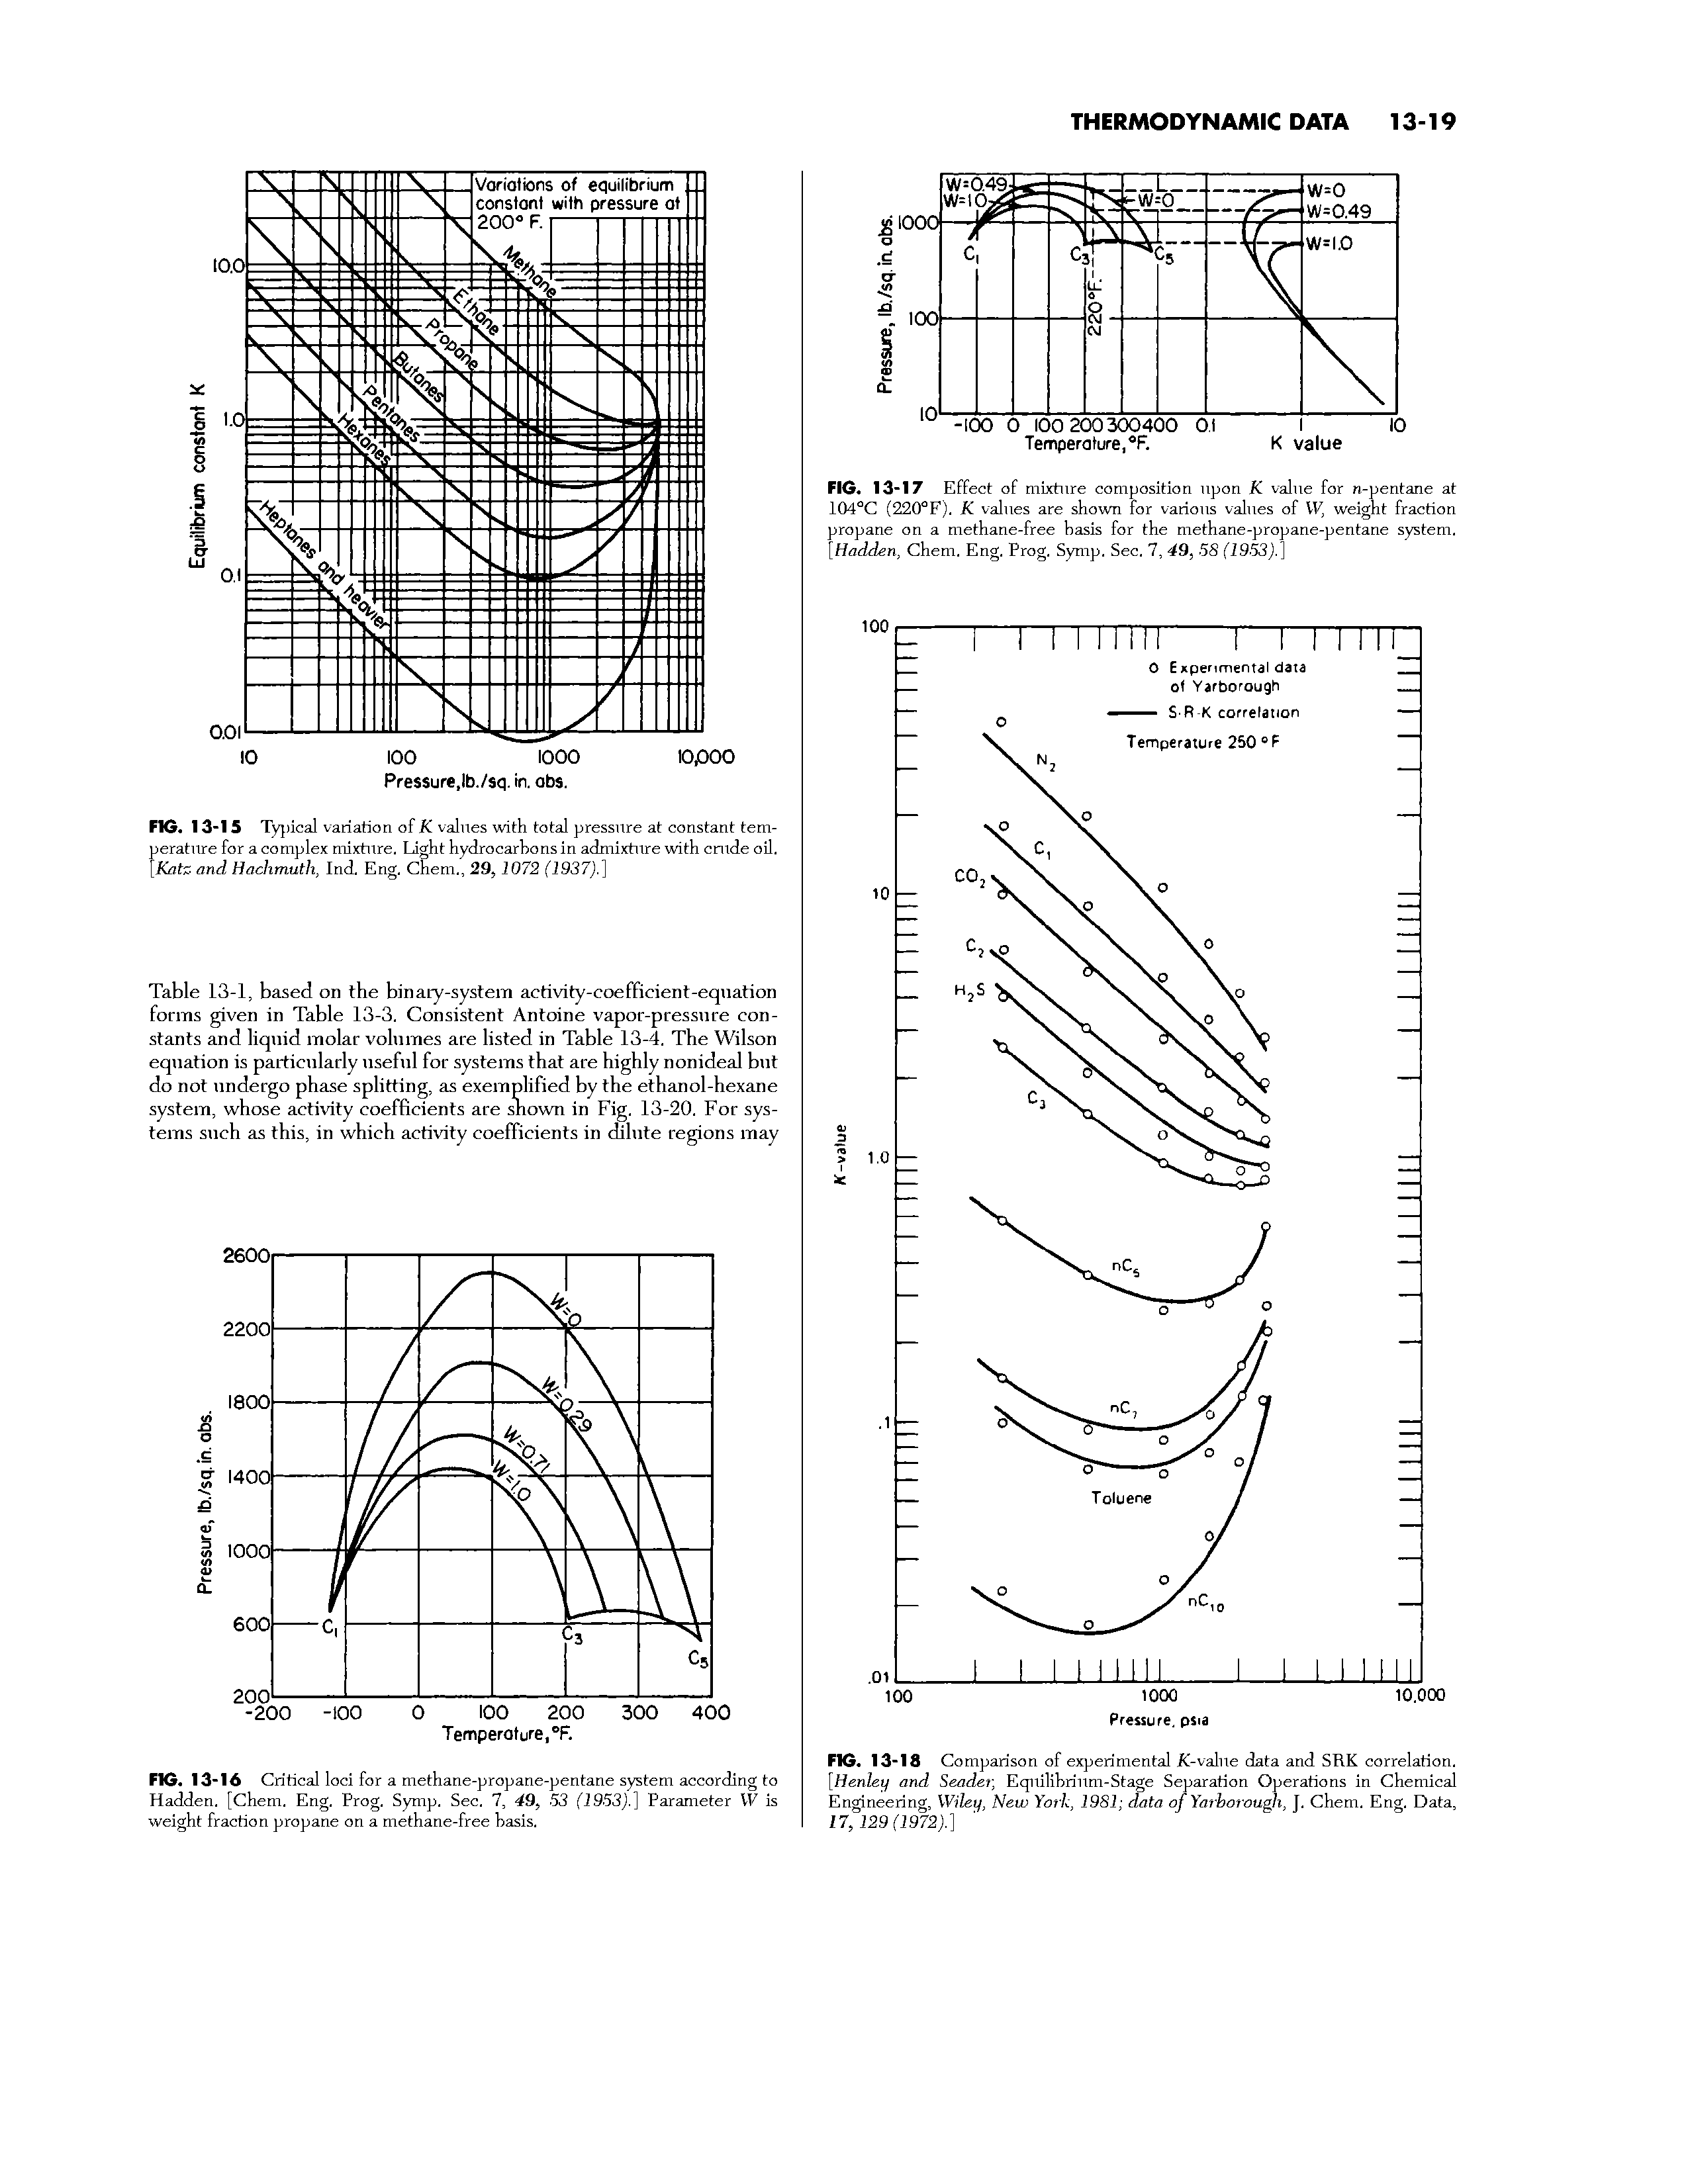 Table 13-1, based on the binary-system activity-coefficient-eqnation forms given in Table 13-3. Consistent Antoine vapor-pressure constants and liquid molar volumes are listed in Table 13-4. The Wilson equation is particularly useful for systems that are highly nonideal but do not undergo phase splitting, as exemplified by the ethanol-hexane system, whose activity coefficients are snown in Fig. 13-20. For systems such as this, in which activity coefficients in dilute regions may...